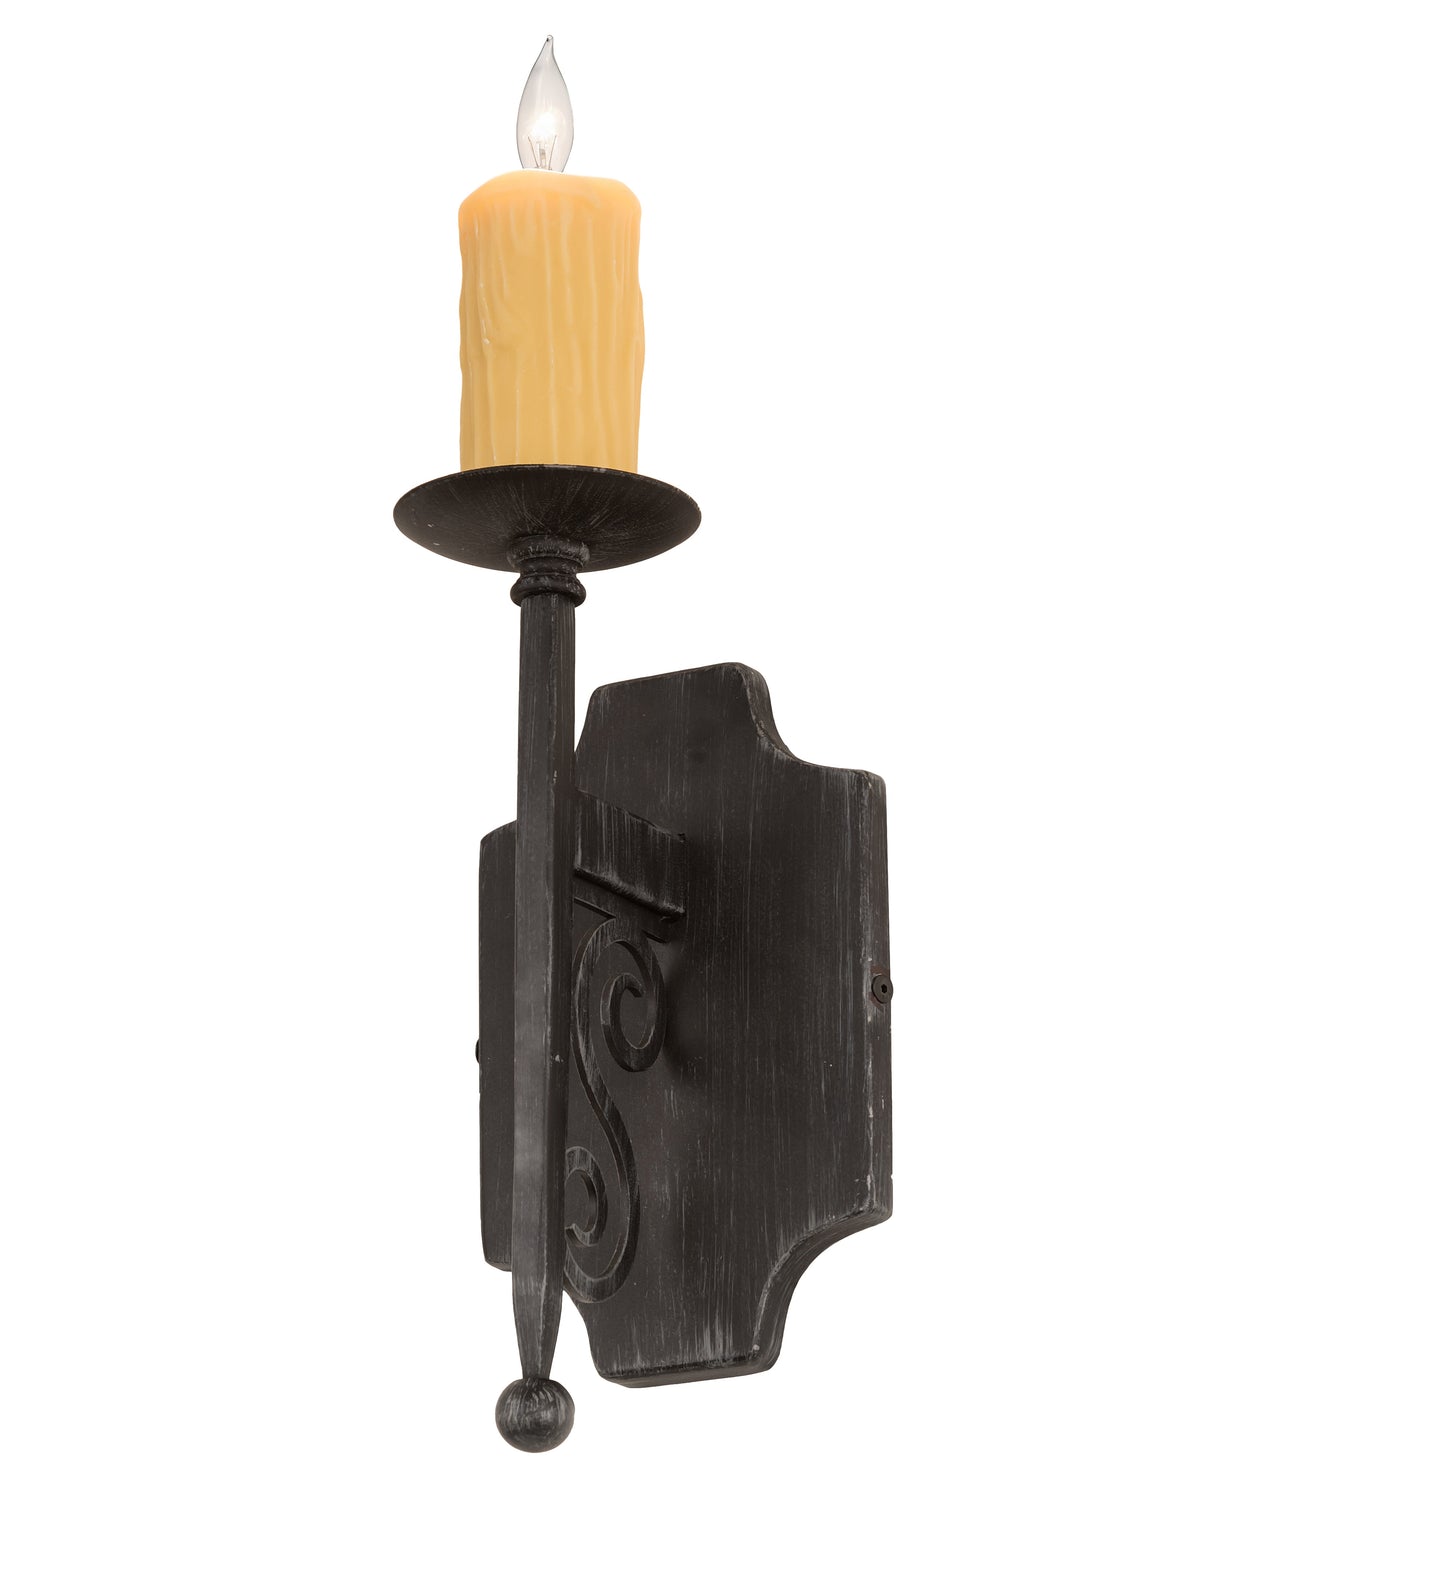 5" Toscano Wall Sconce by 2nd Ave Lighting